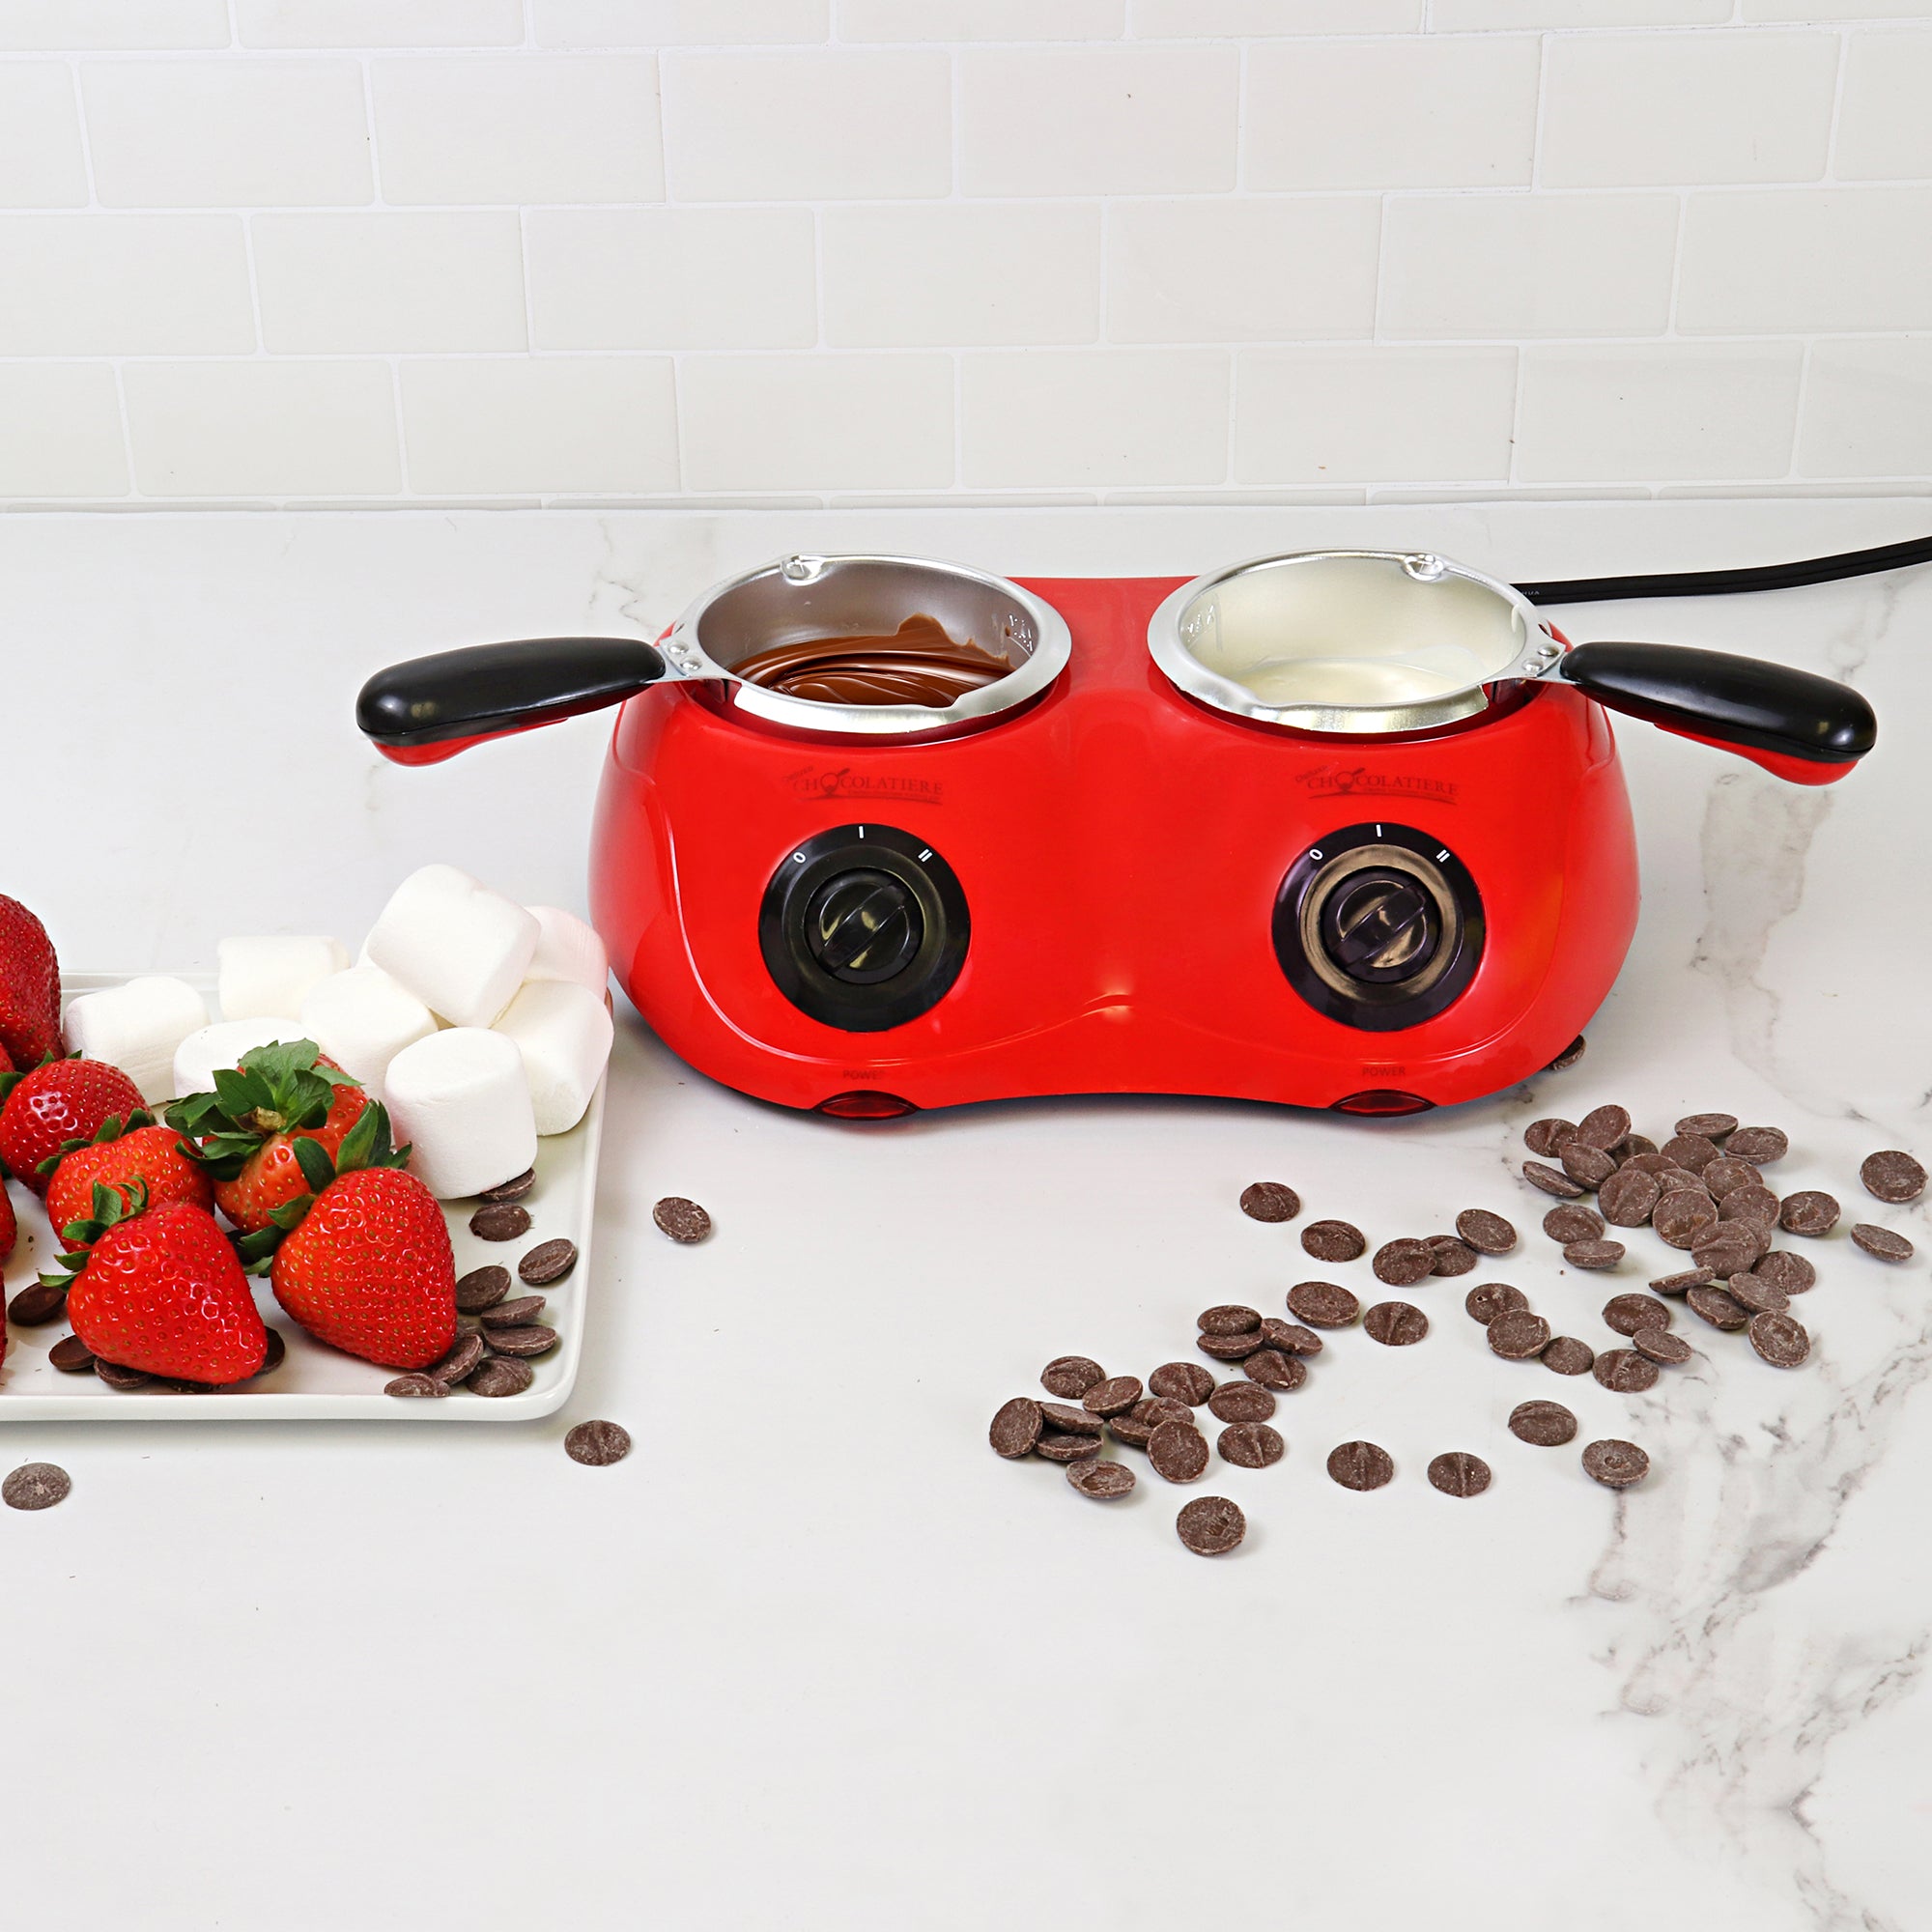 Lifestyle image of the chocolatiere on a white marbled countertop with melted milk chocolate in one pot and white chocolate in the other. There is a plate to the left with strawberries and marshmallows on it and unmelted chocolate discs scattered on the counter to the right